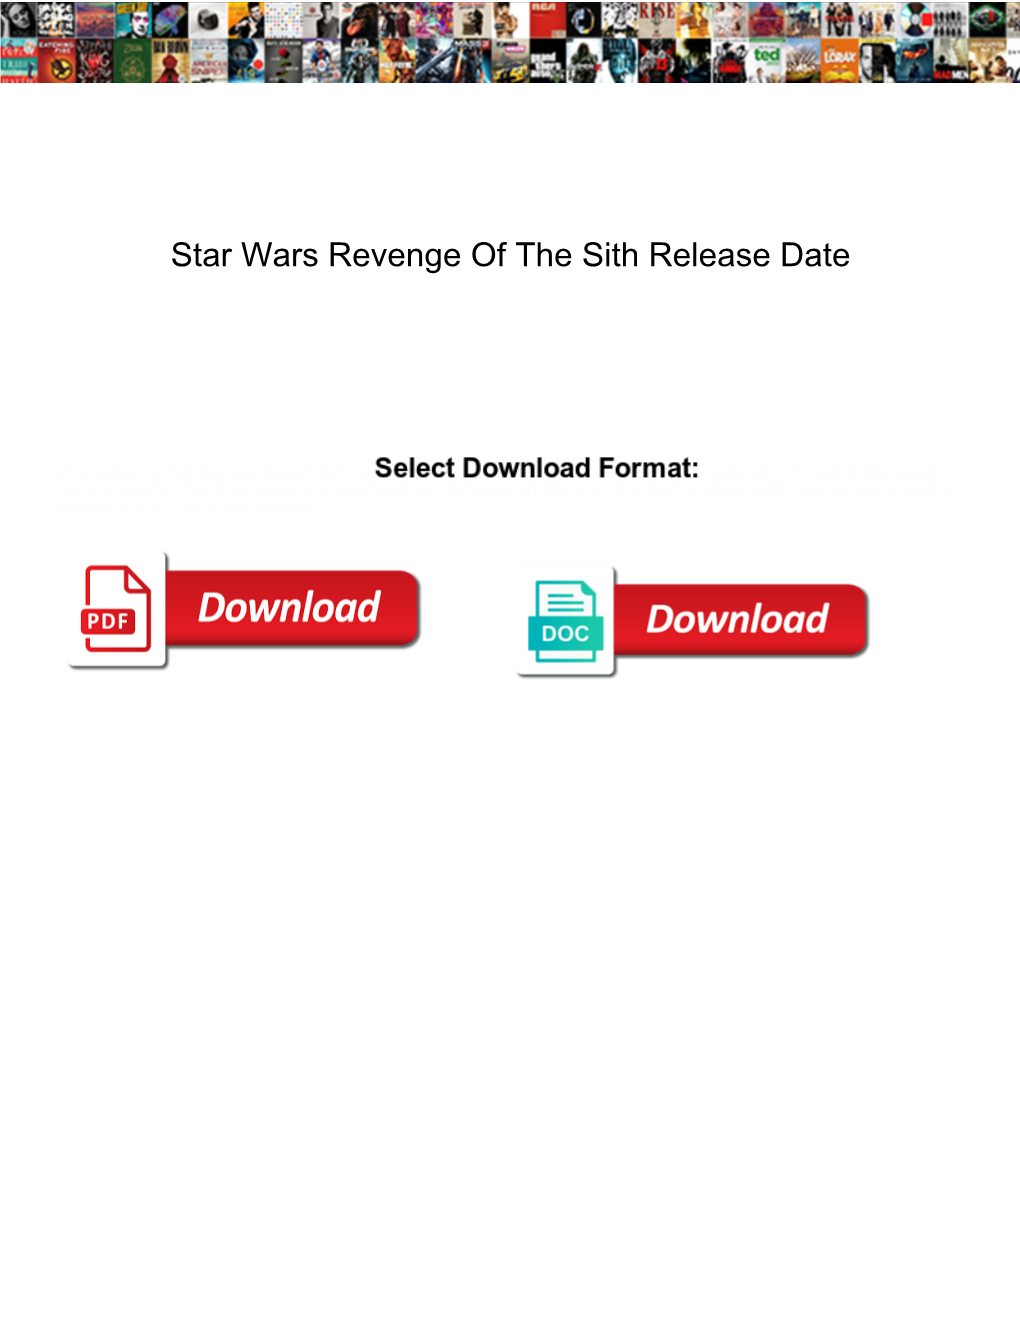 Star Wars Revenge of the Sith Release Date